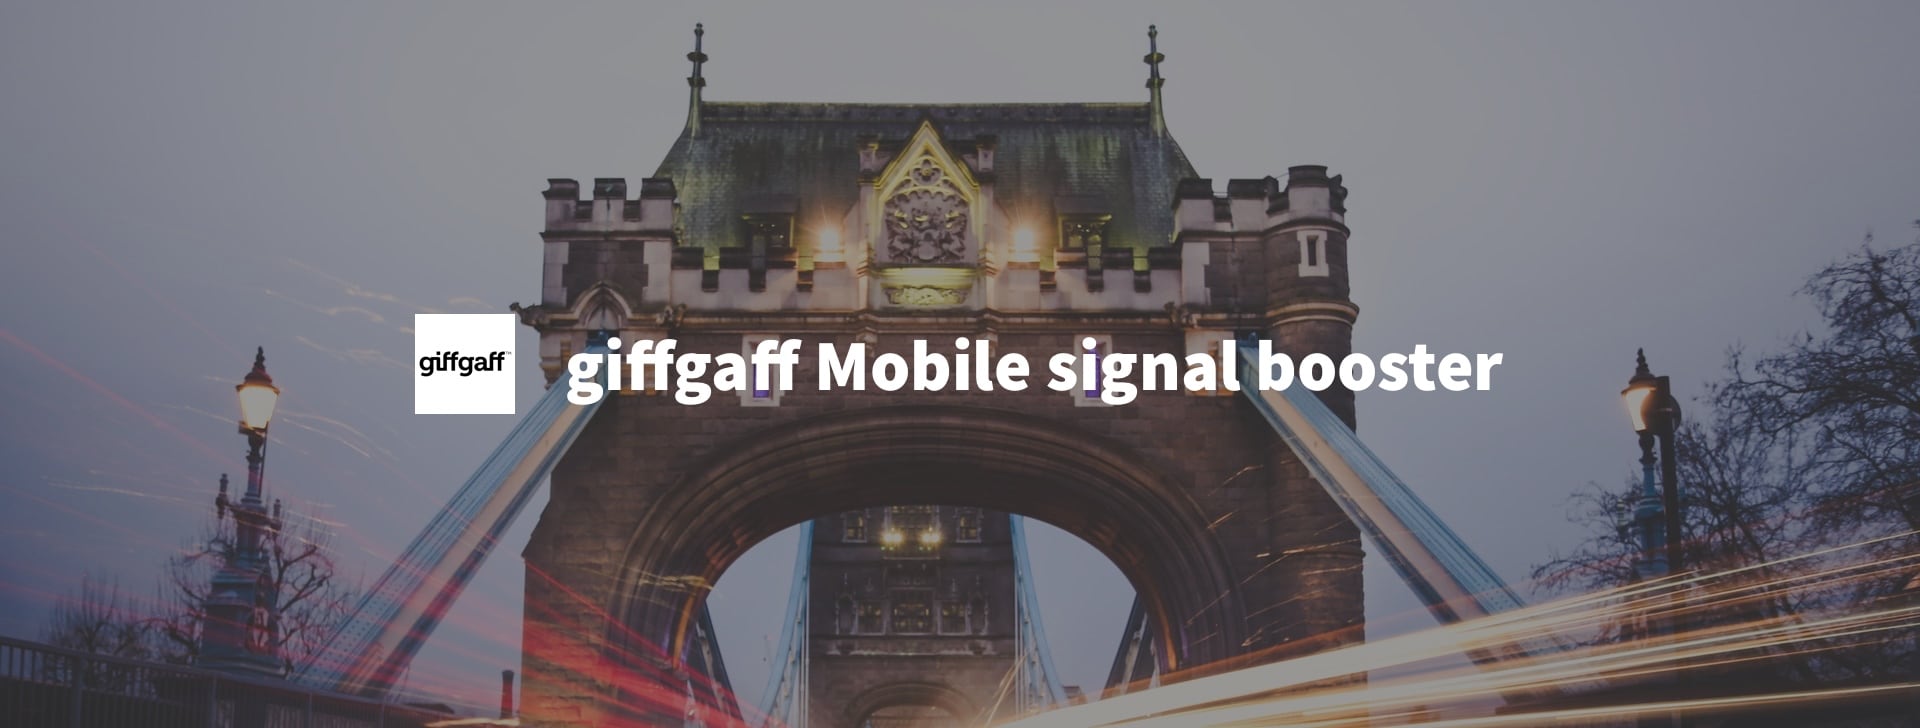 GiffGaff phone signal booster